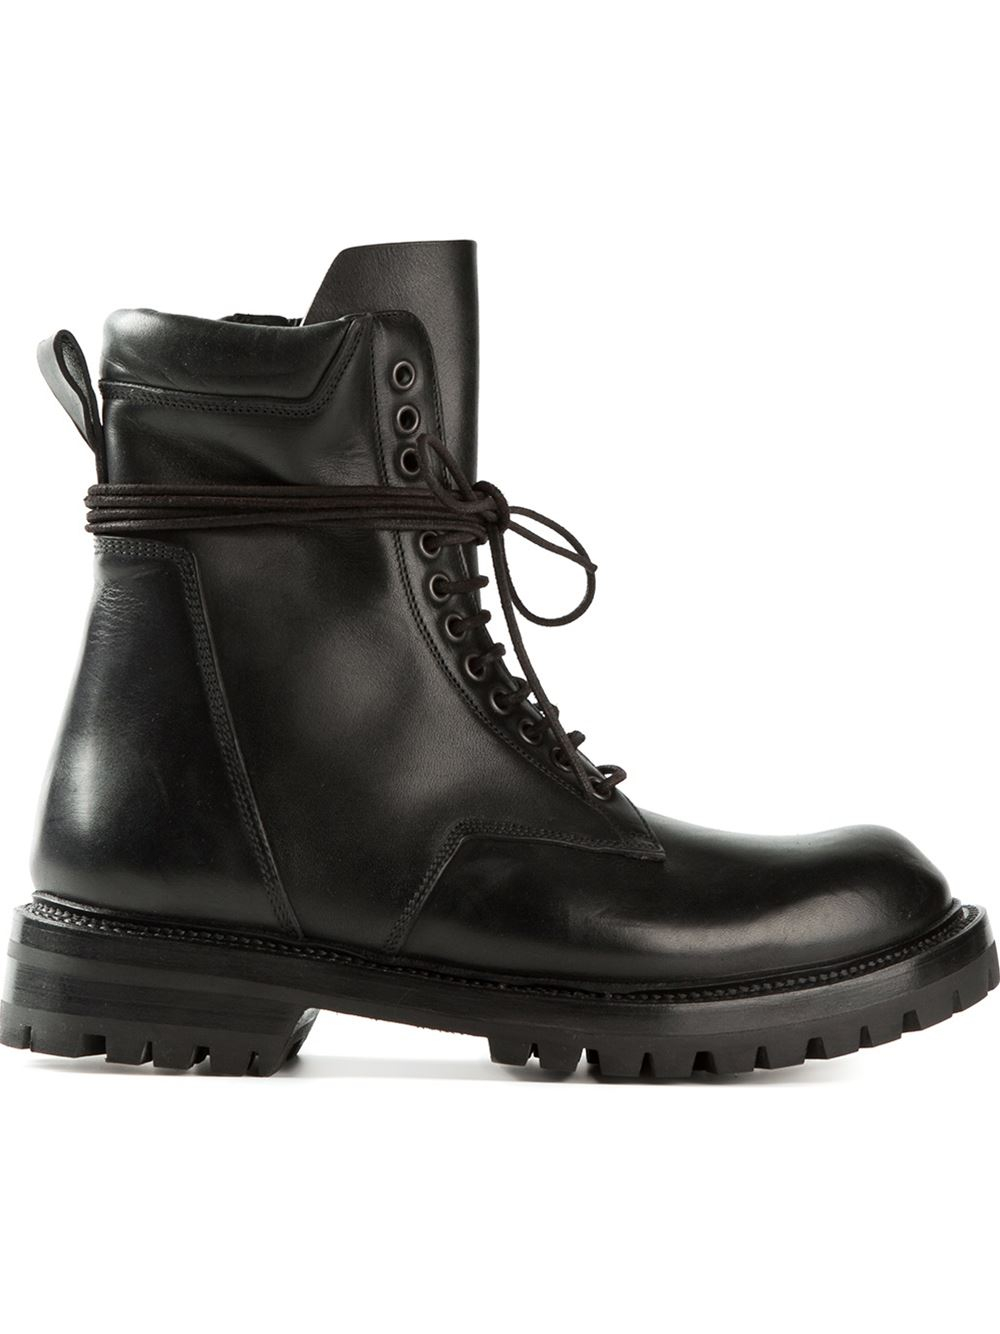 Rick Owens Combat Boots in Black for Men - Lyst